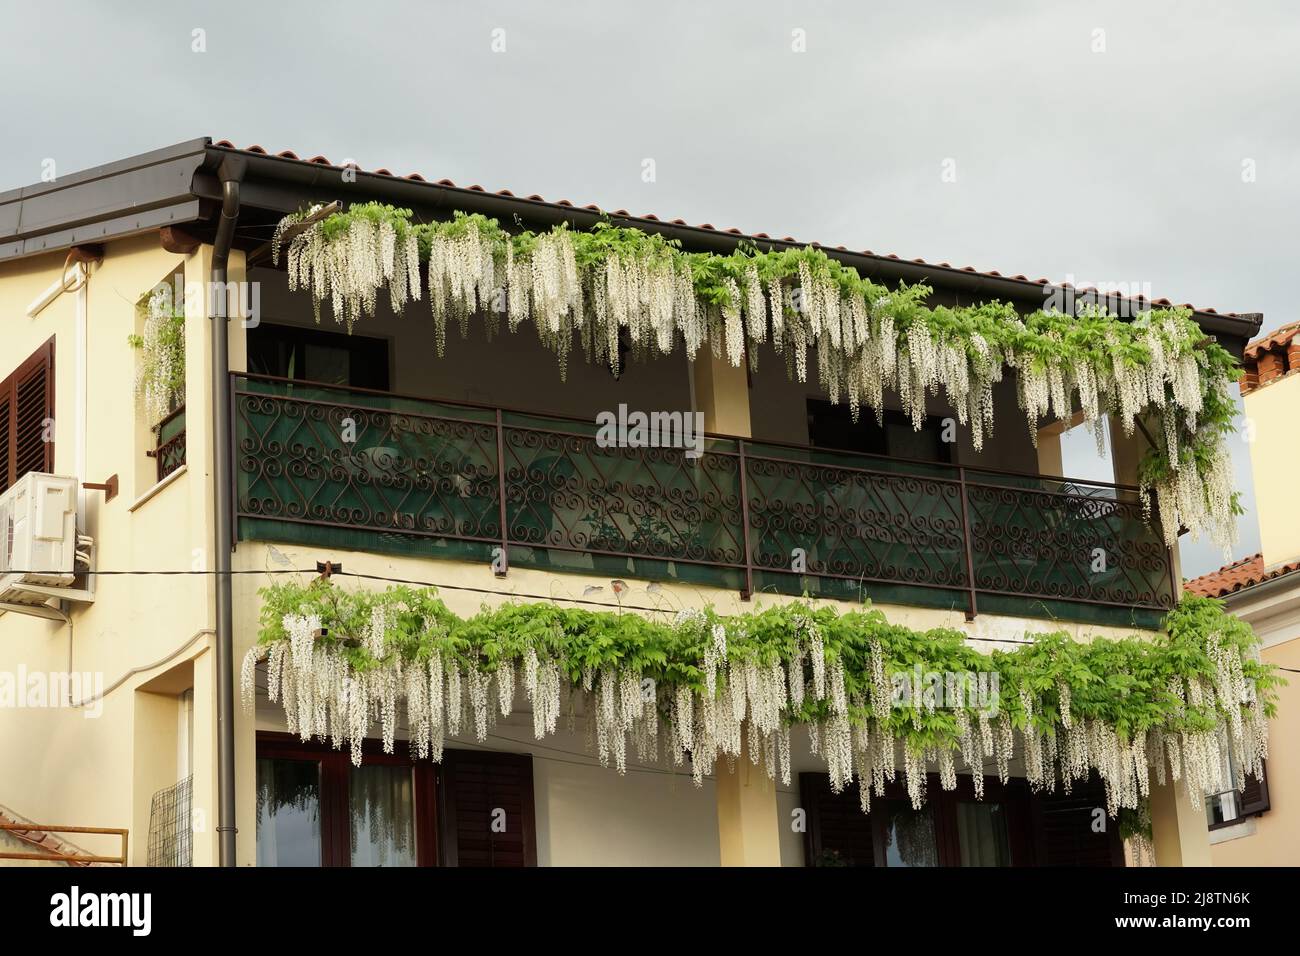 Balcony with white wisteria ornamental flowers hanging down from it in thick clusters. Stock Photo